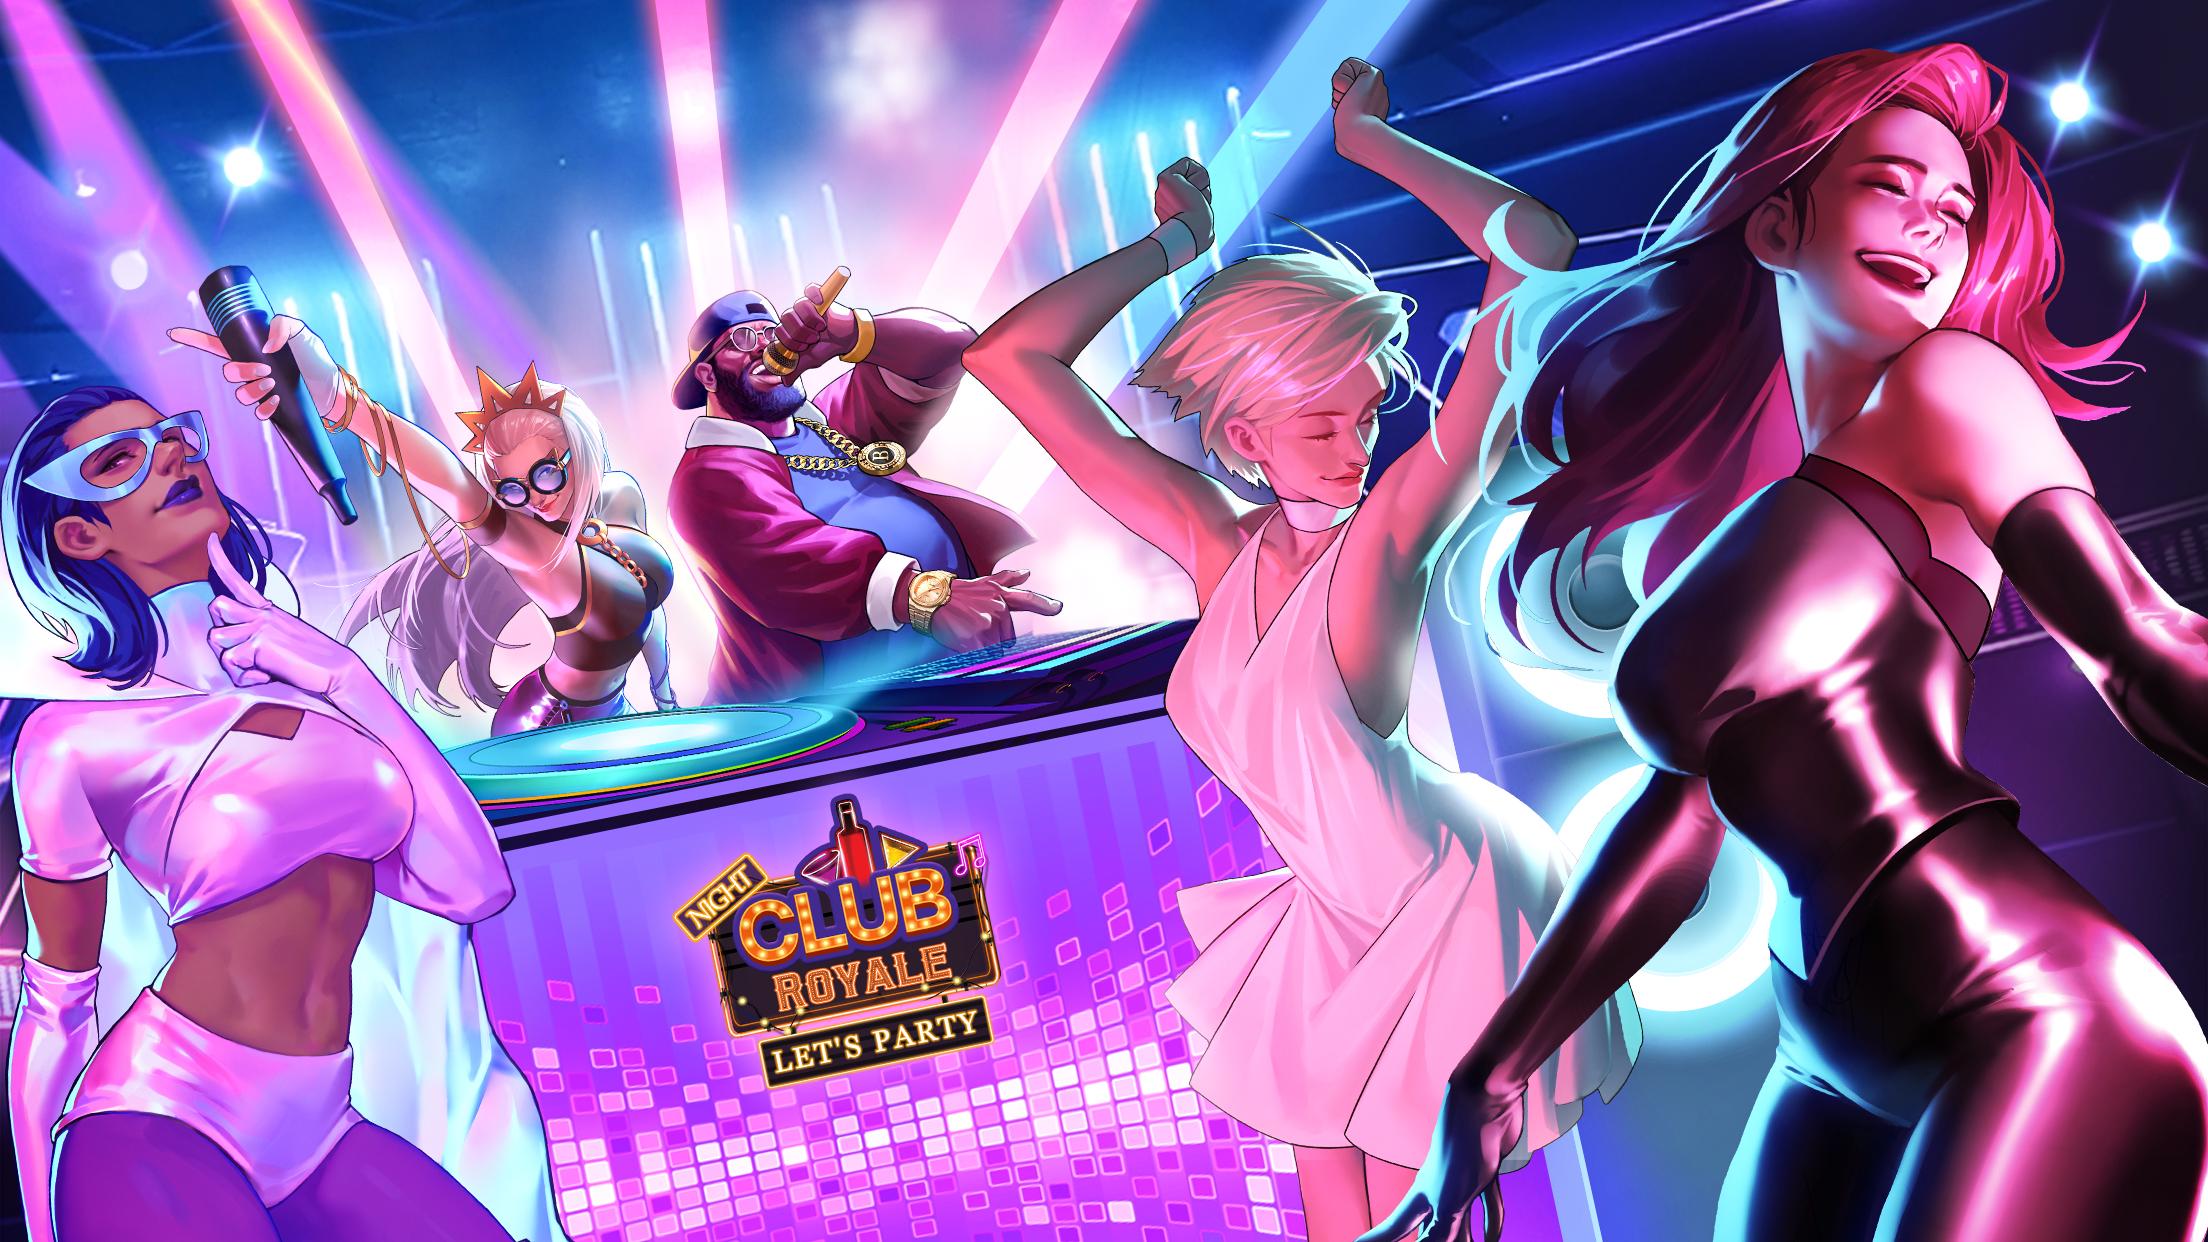 Night club игра. Fredina Night Club АПК. Android Party. Girls and City: Spin the Bottle. Nightclub Manager: Violet Vibe.